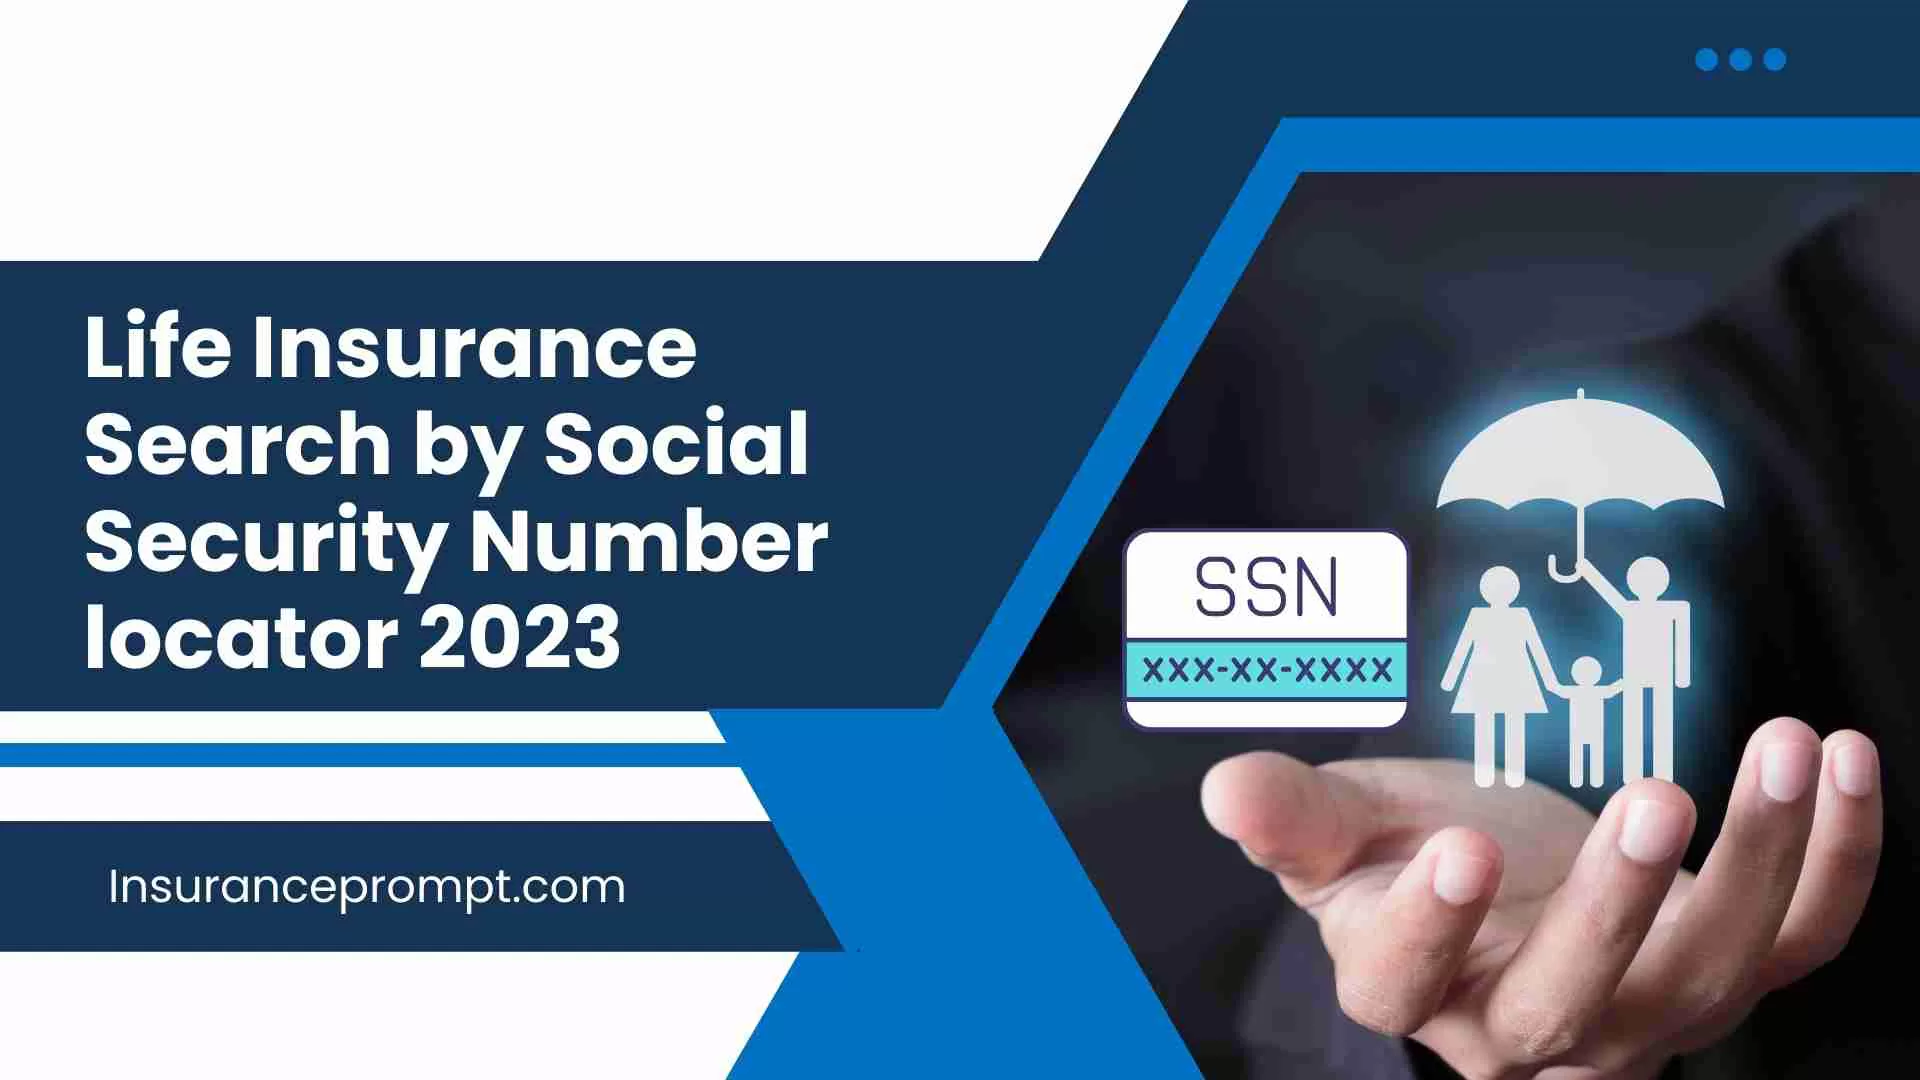 Life Insurance Search by Social Security Number locator 2023